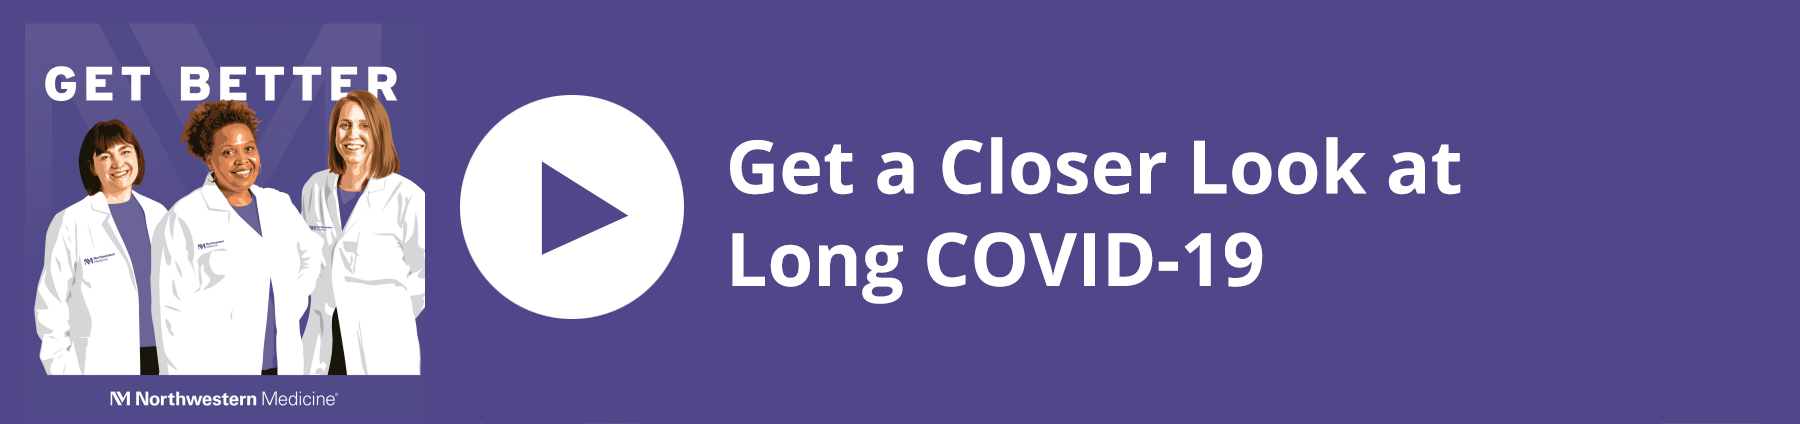 Get Better - Get a Closer Look at Long COVID-19